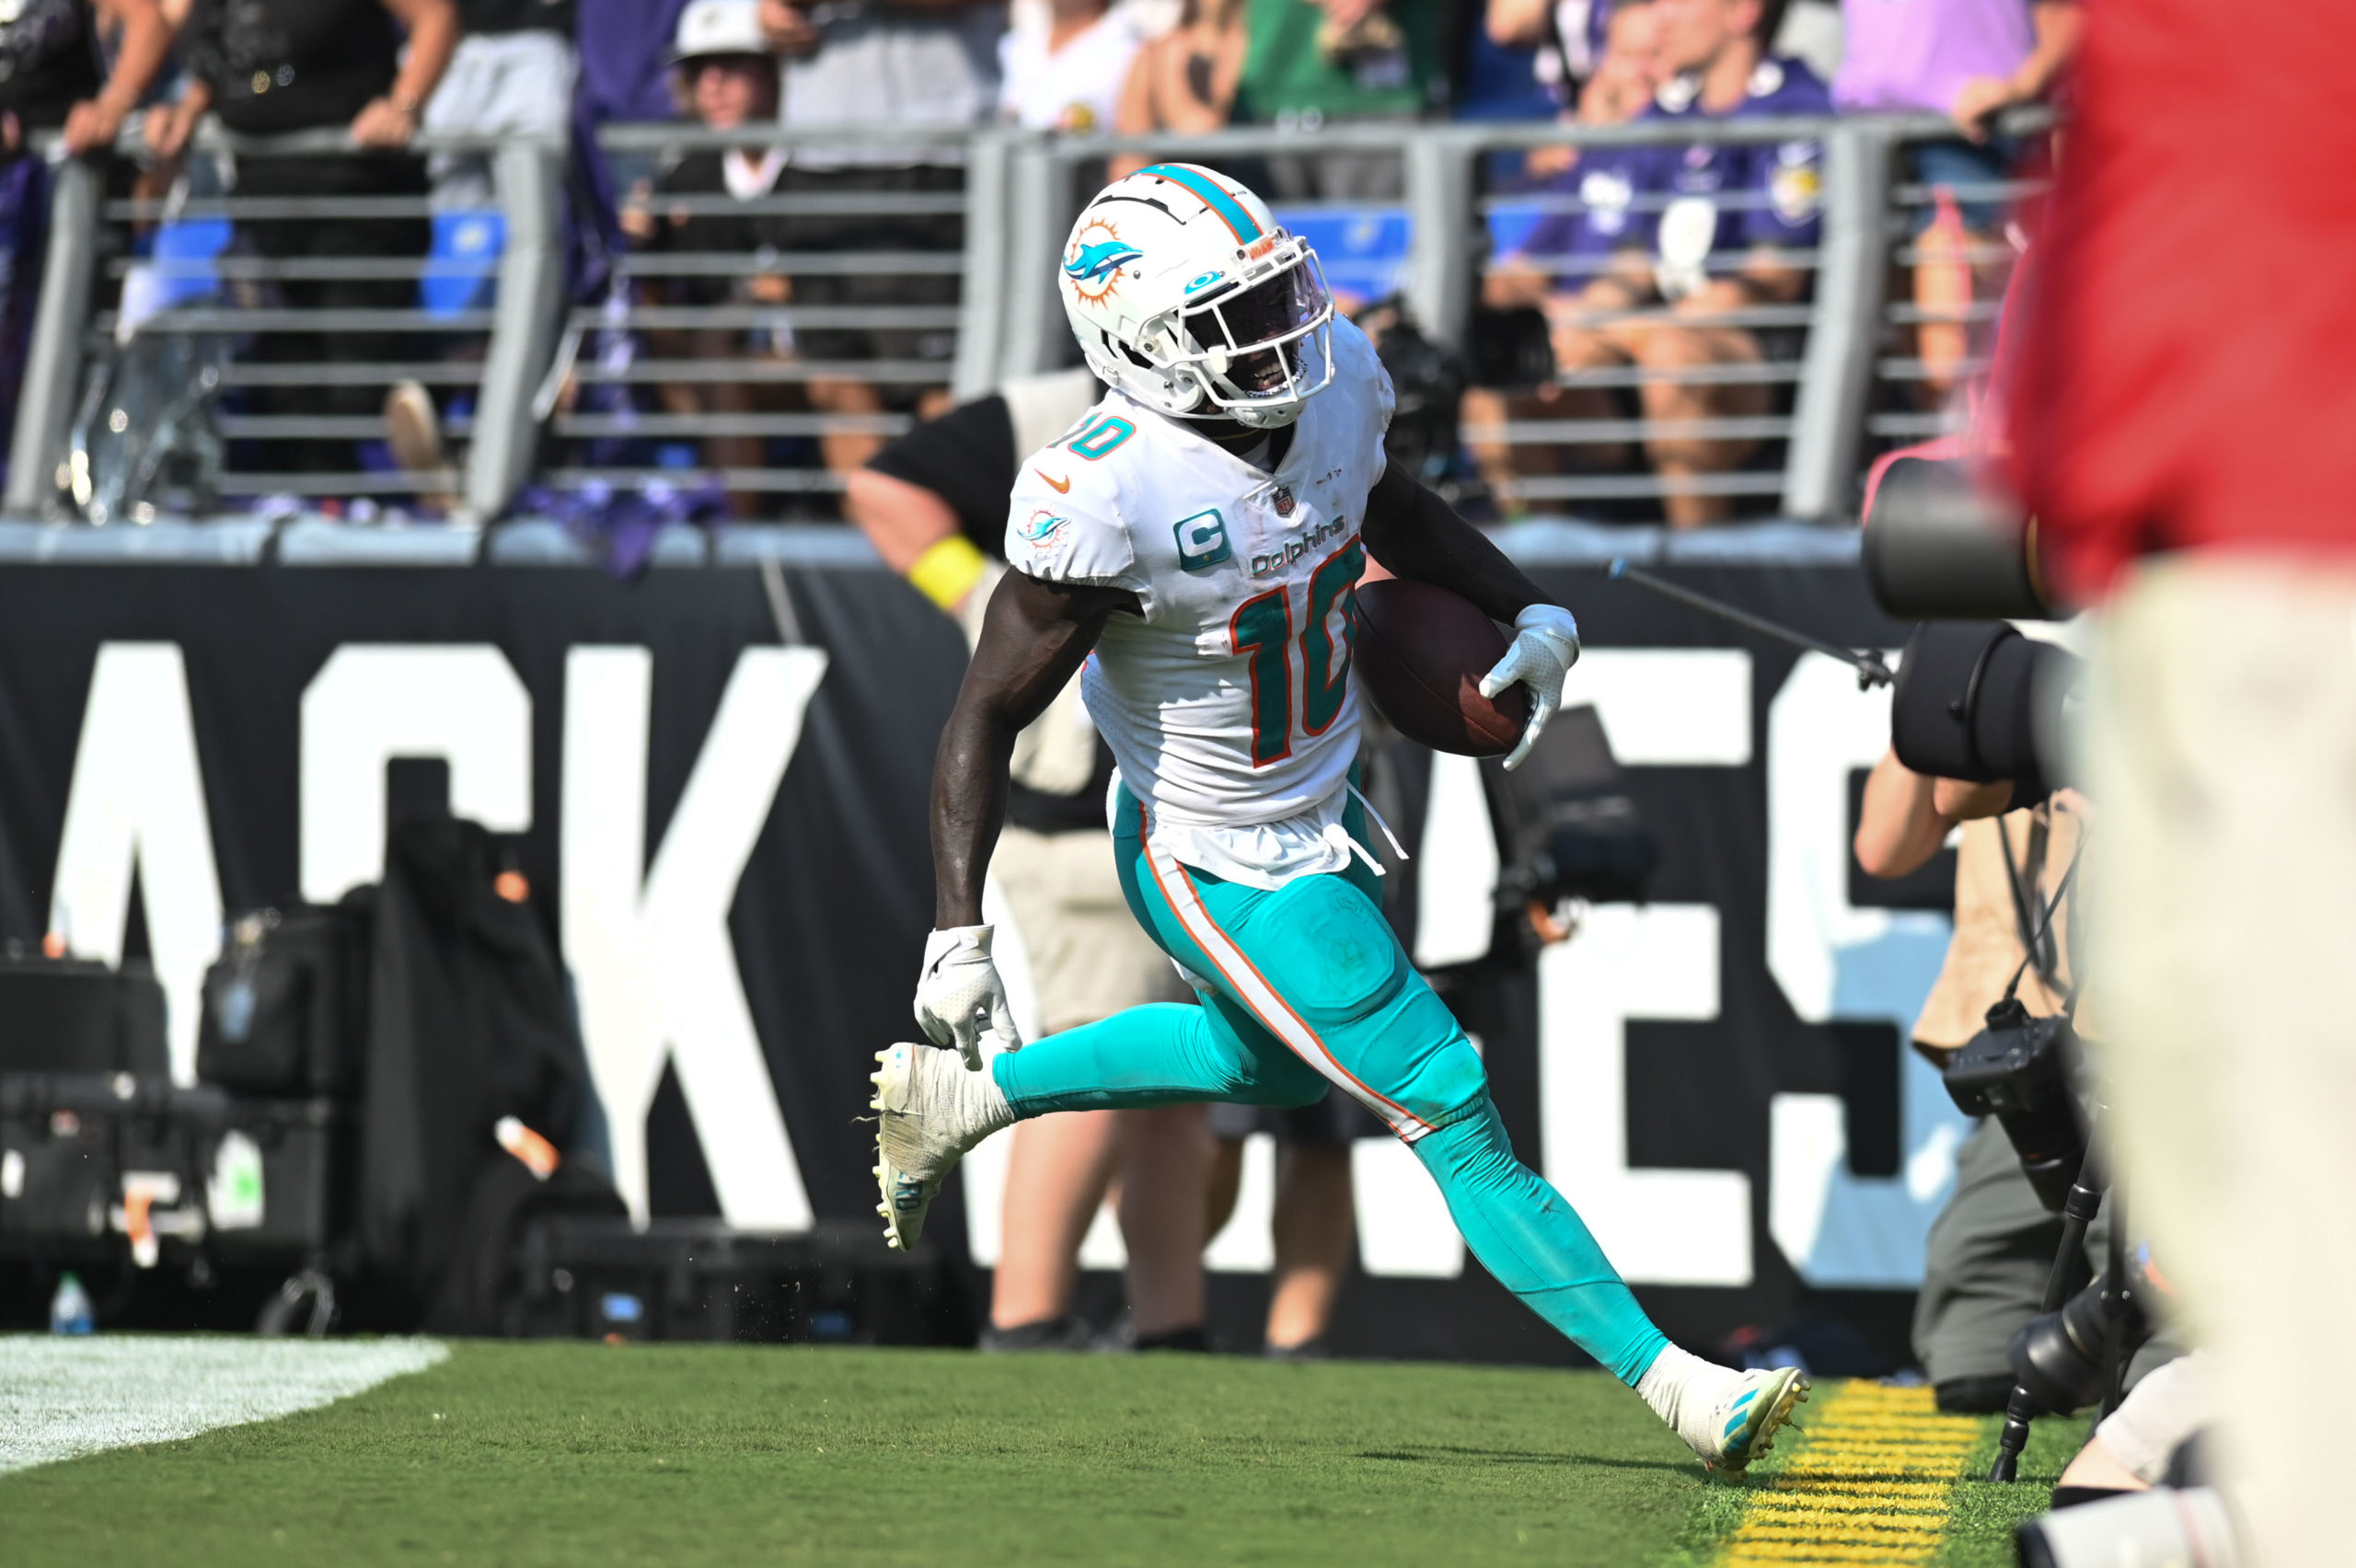 Tyreek Hill, Dolphins Made ‘Plays No One Else Can Make’